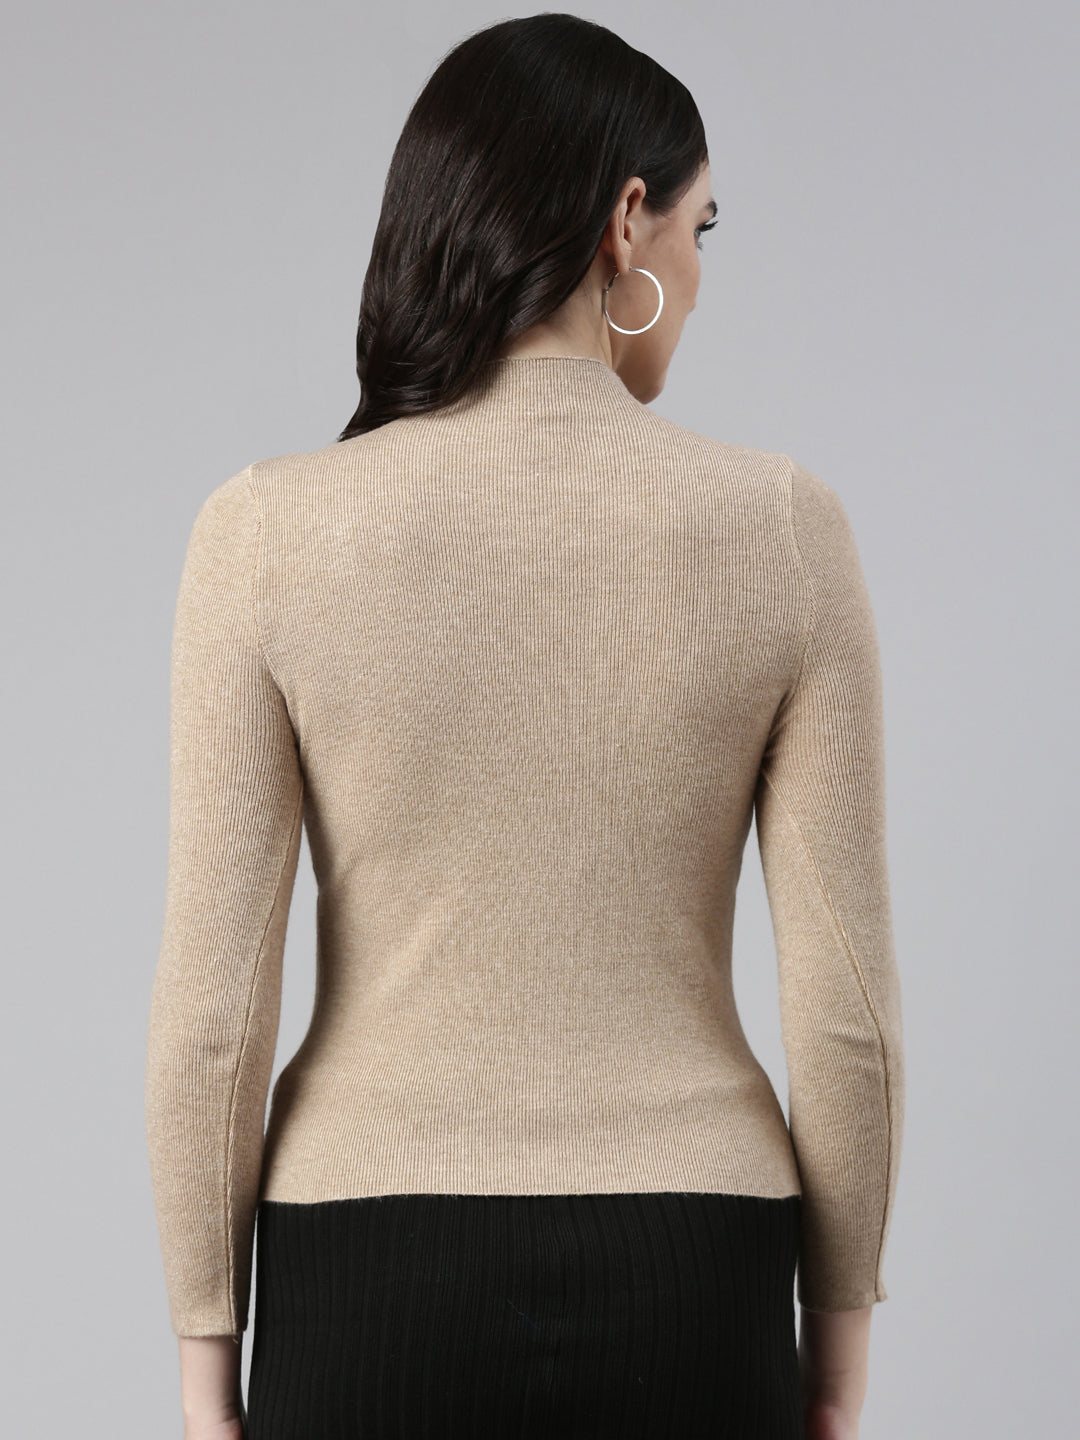 High Neck Solid Beige Fitted Regular Top